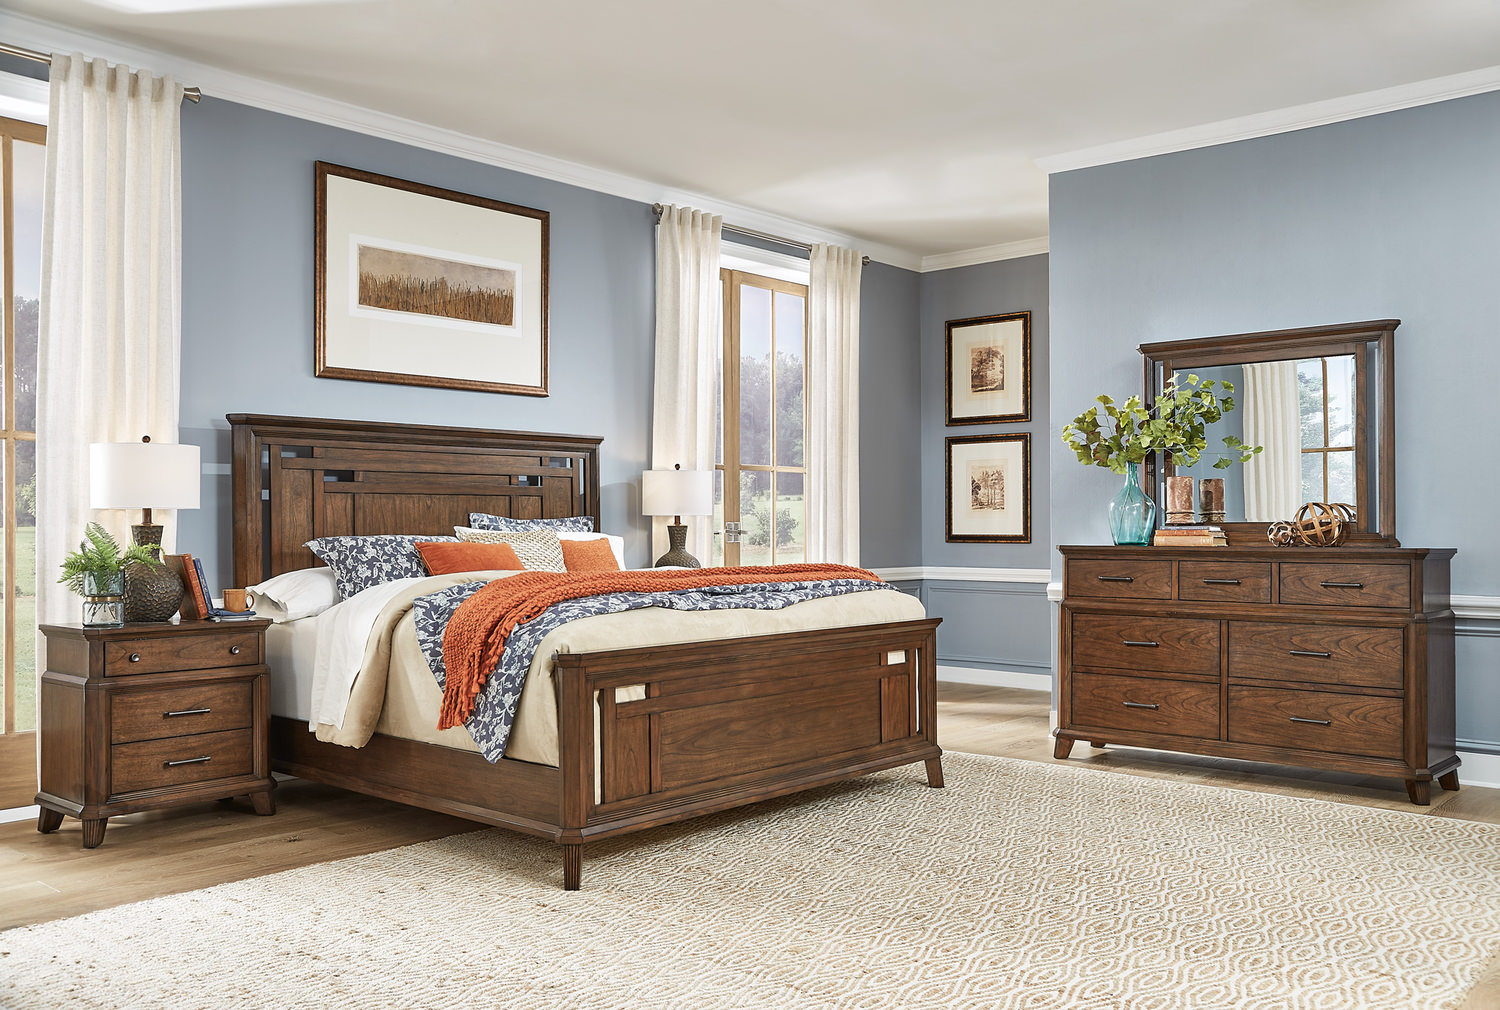 Everly Bedroom Suite by Thomas Cole Designs HOM Furniture